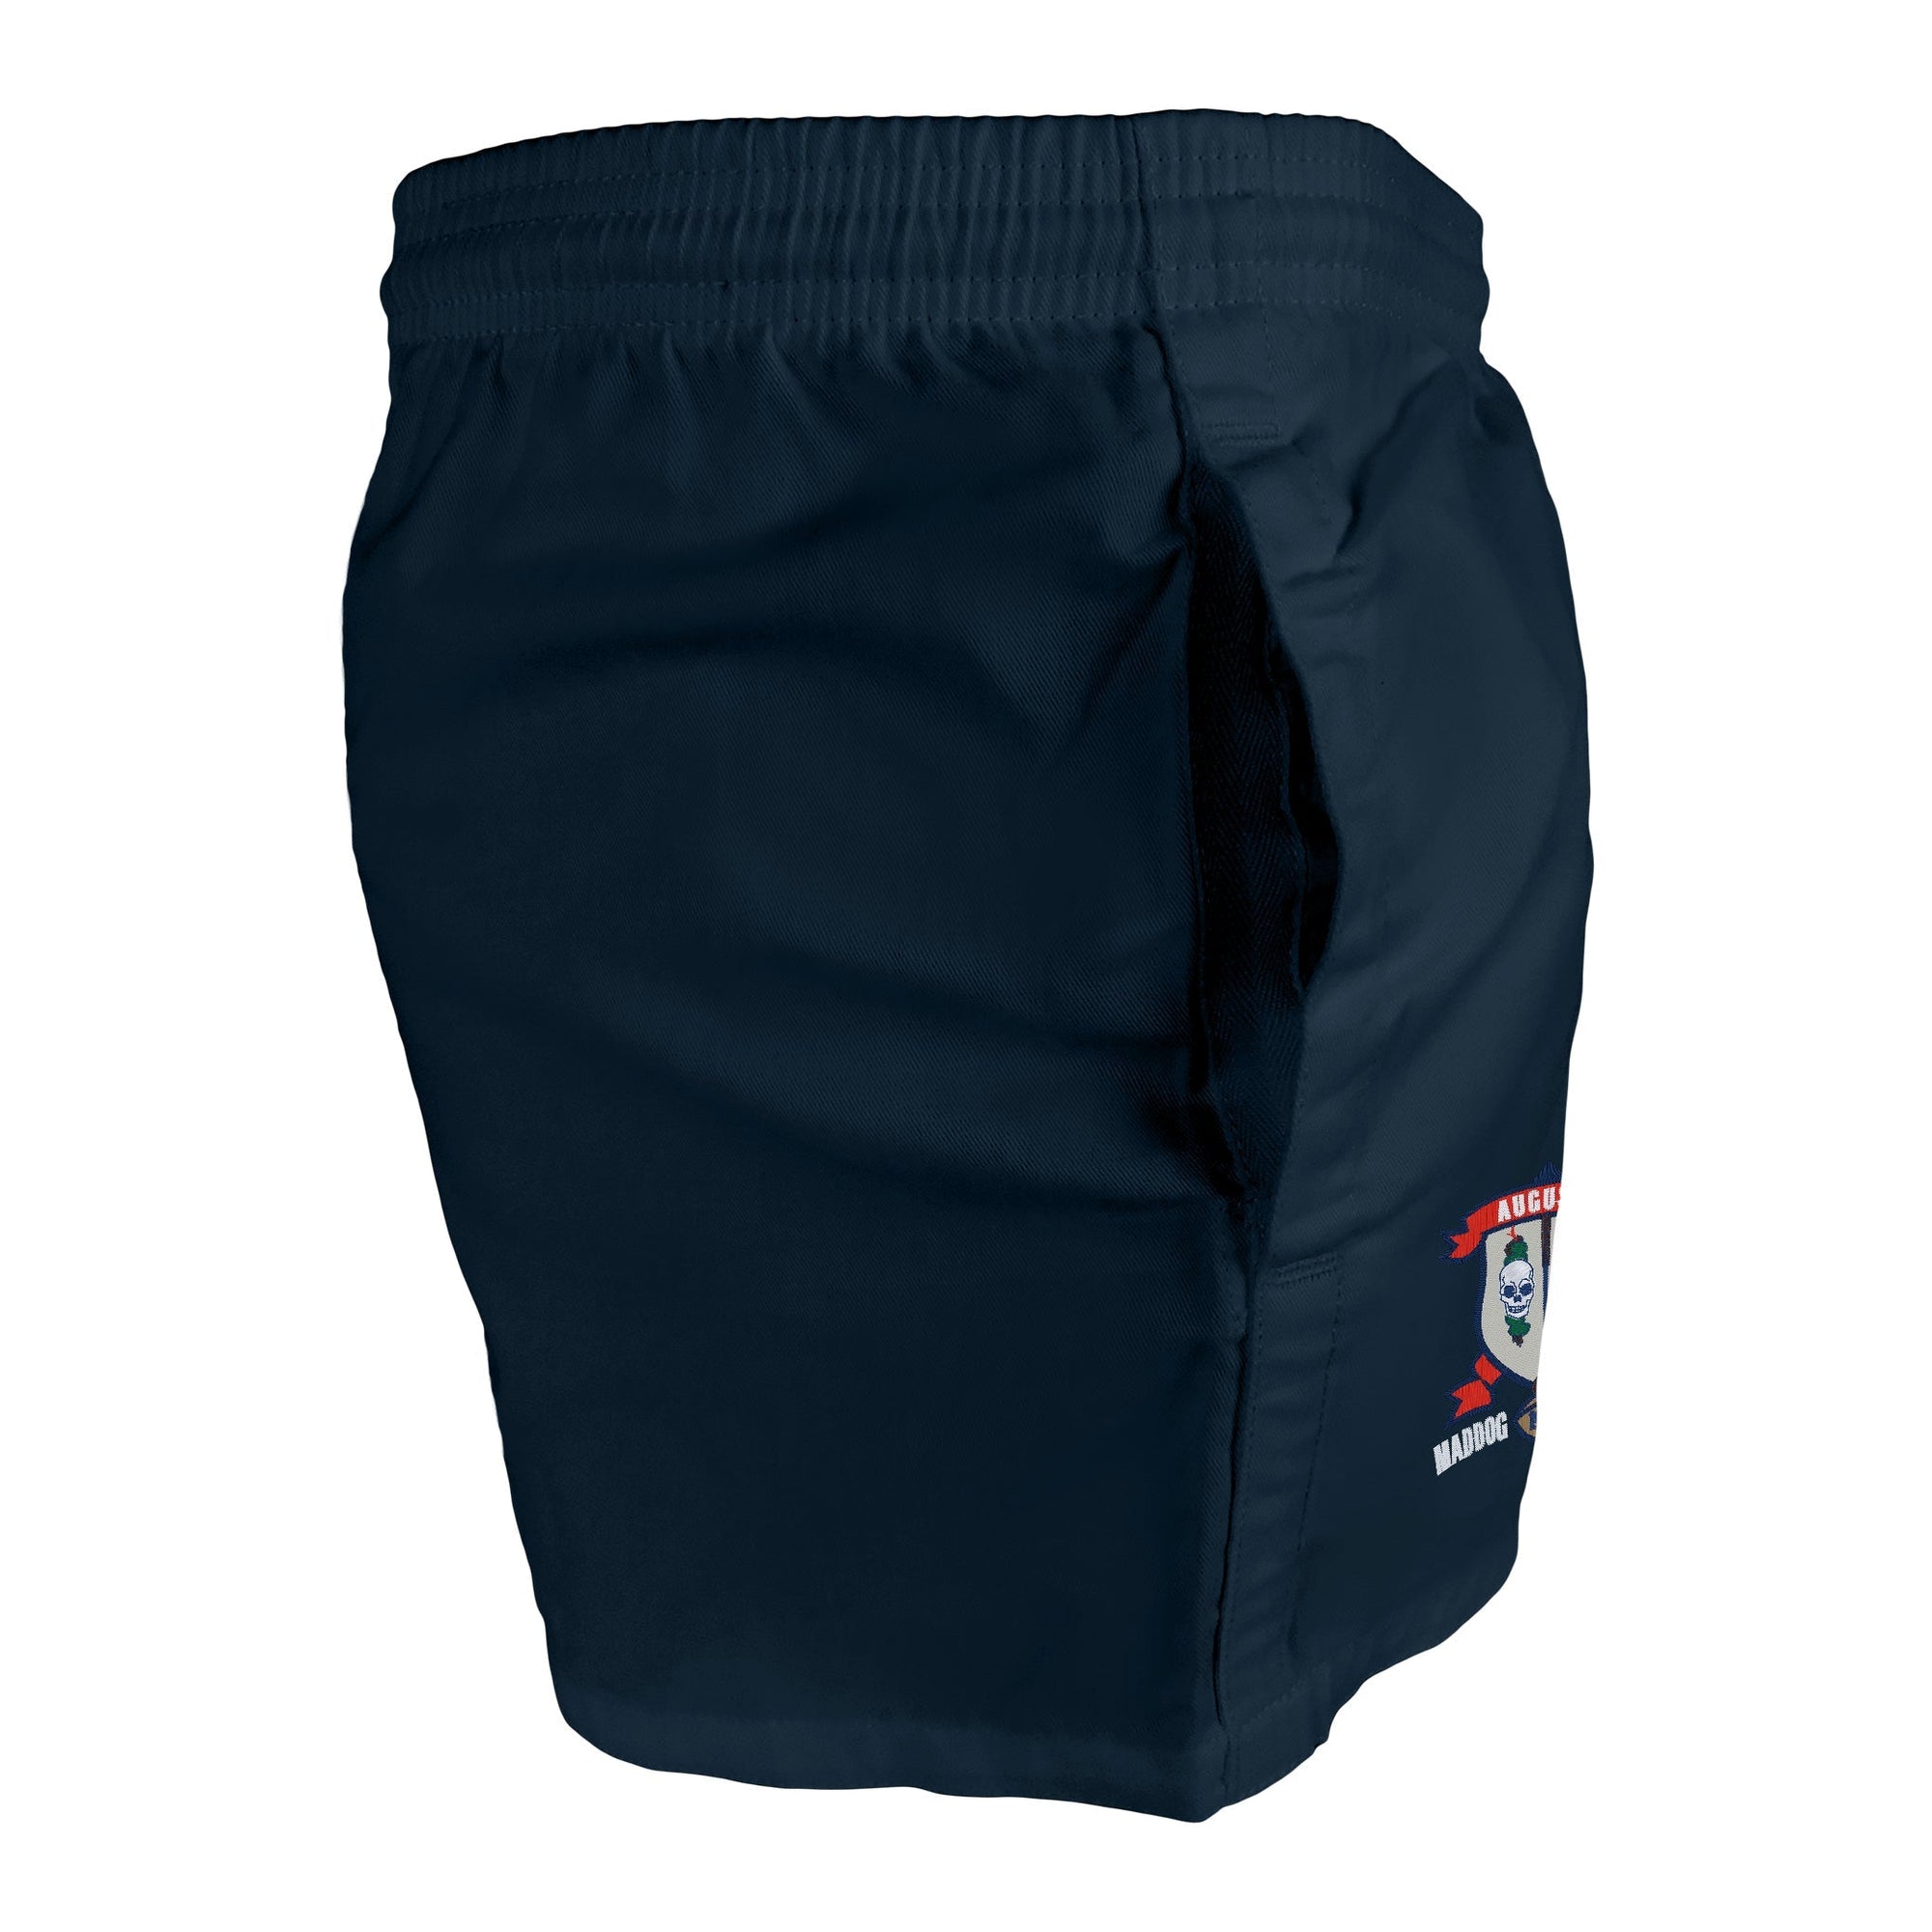 Rugby Imports Augusta Rugby Kiwi Pro Rugby Shorts